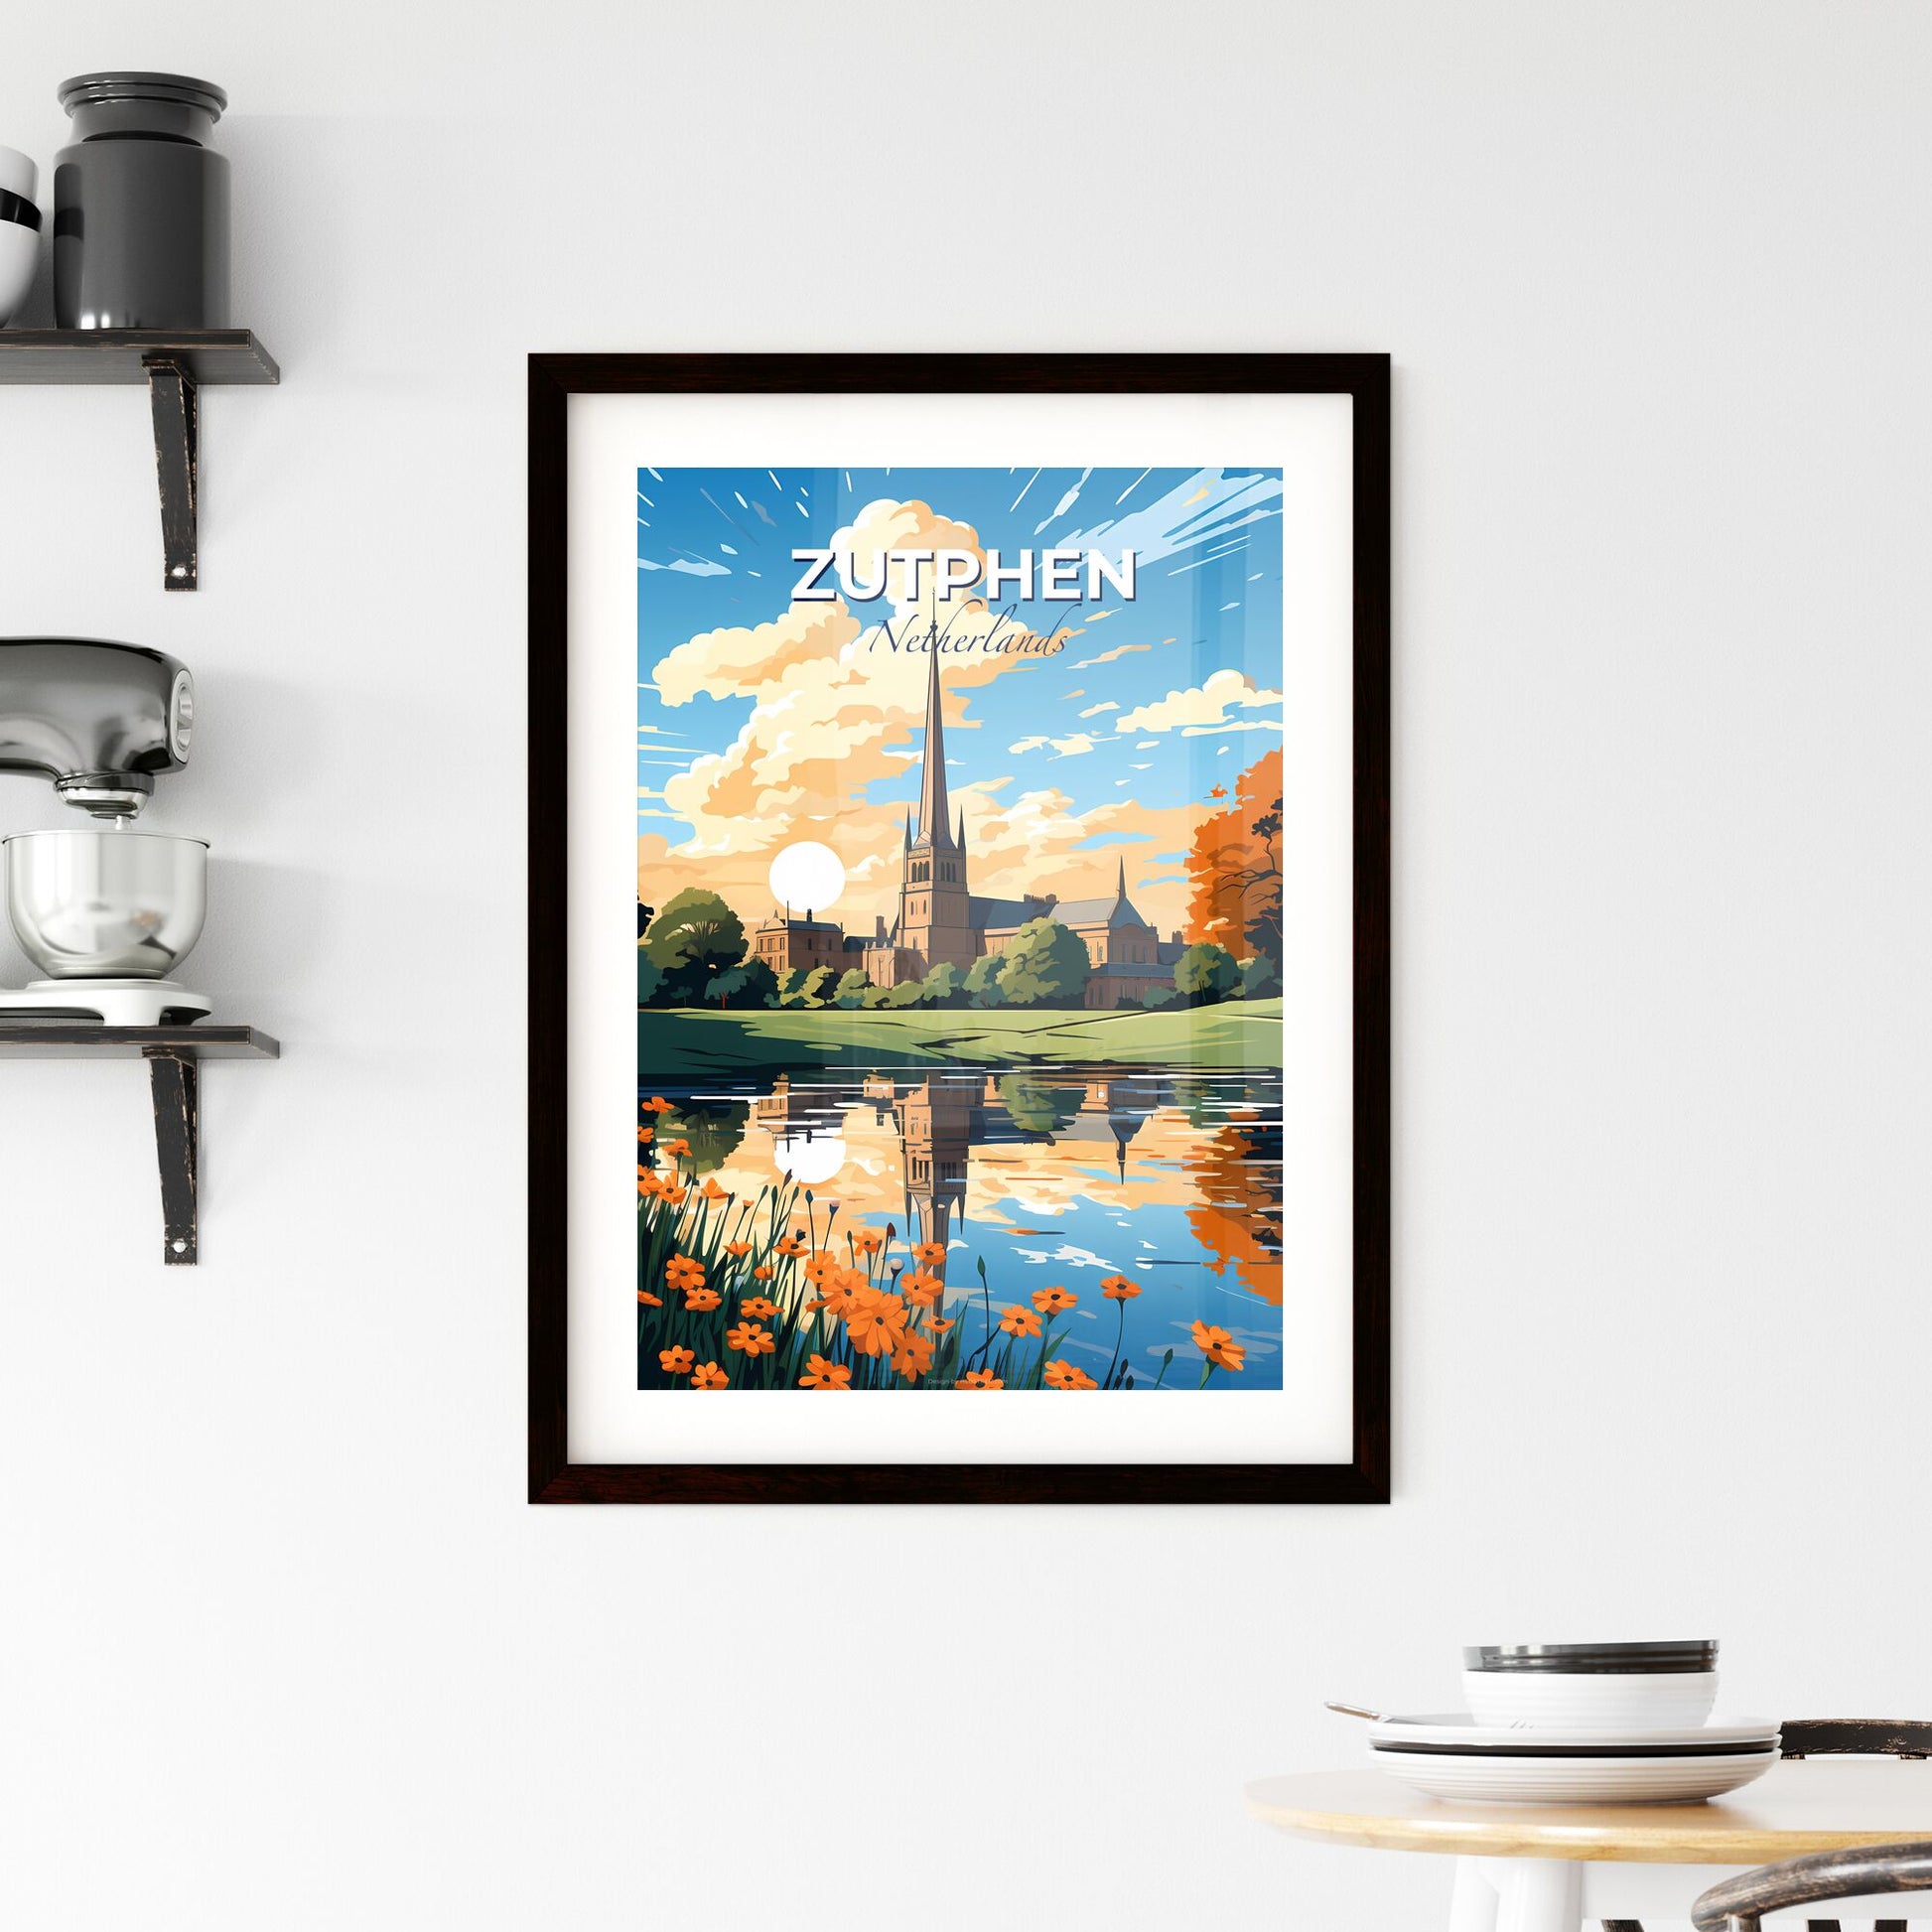 Zutphen, Netherlands, A Poster of a painting of a building with a tall spire and trees and a pond with orange flowers Default Title